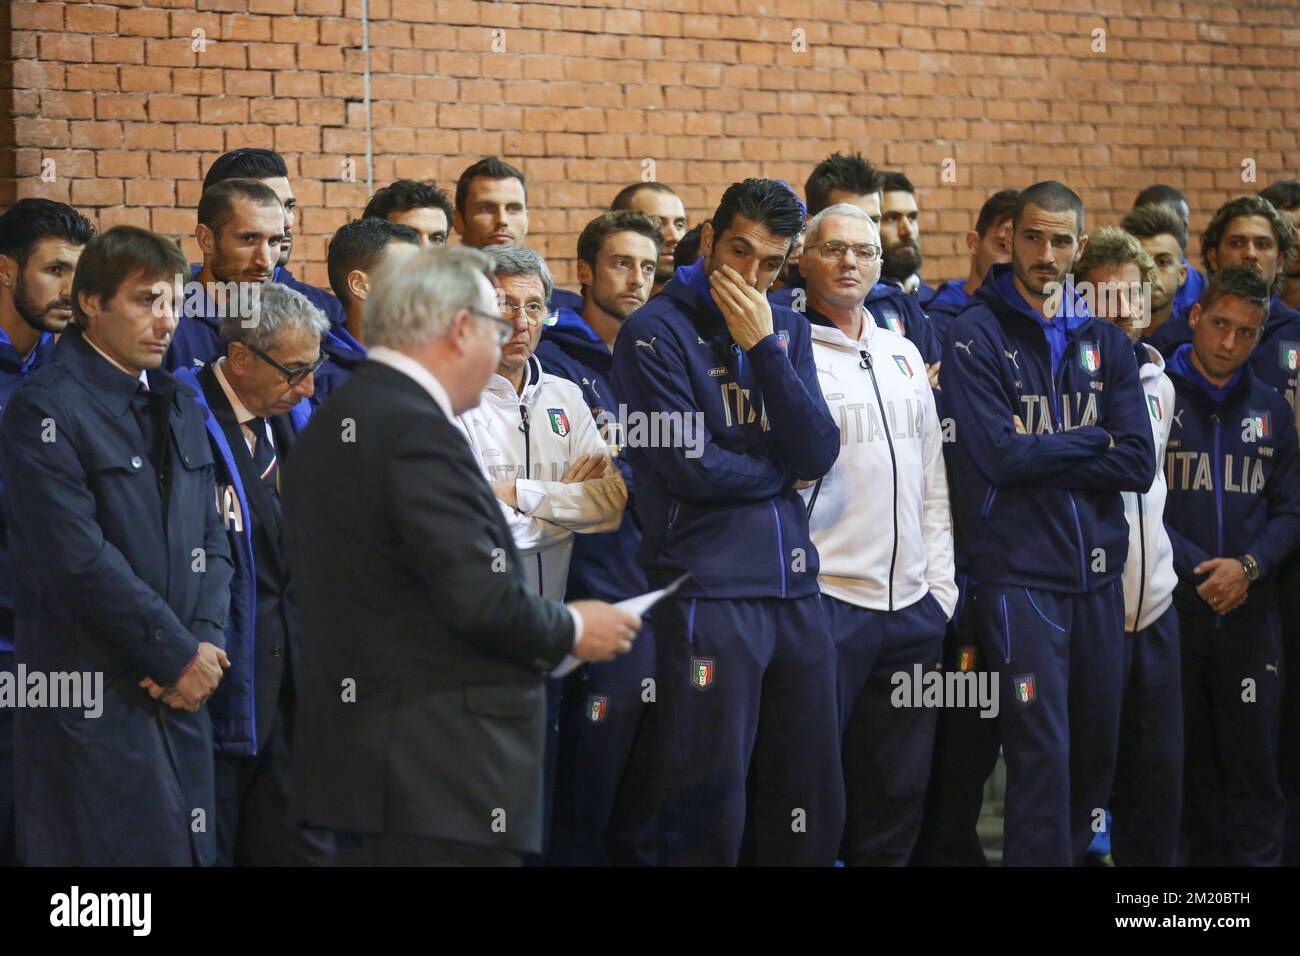 20151112 - BRUSSELS, BELGIUM: Italy's goalkeeper Gianluigi Buffon (C) and Italy's players pictured during a tribute to commemorate the Heysel stadium disaster 30 years ago, in Brussels former Heysel stadium, now called King Baudouin stadium (Stade Roi Baudouin - Koning Boudewijnsatdion), Thursday 12 November 2015. On 29 May 1985, 39 persons because of clashes between supporters and the collapse of a part of a stand, before the start of the European Cup final between Liverpool and Juventus. Red Devils Belgian national team is playing a friendly games against Italy tomorrow in preparation of Eur Stock Photo